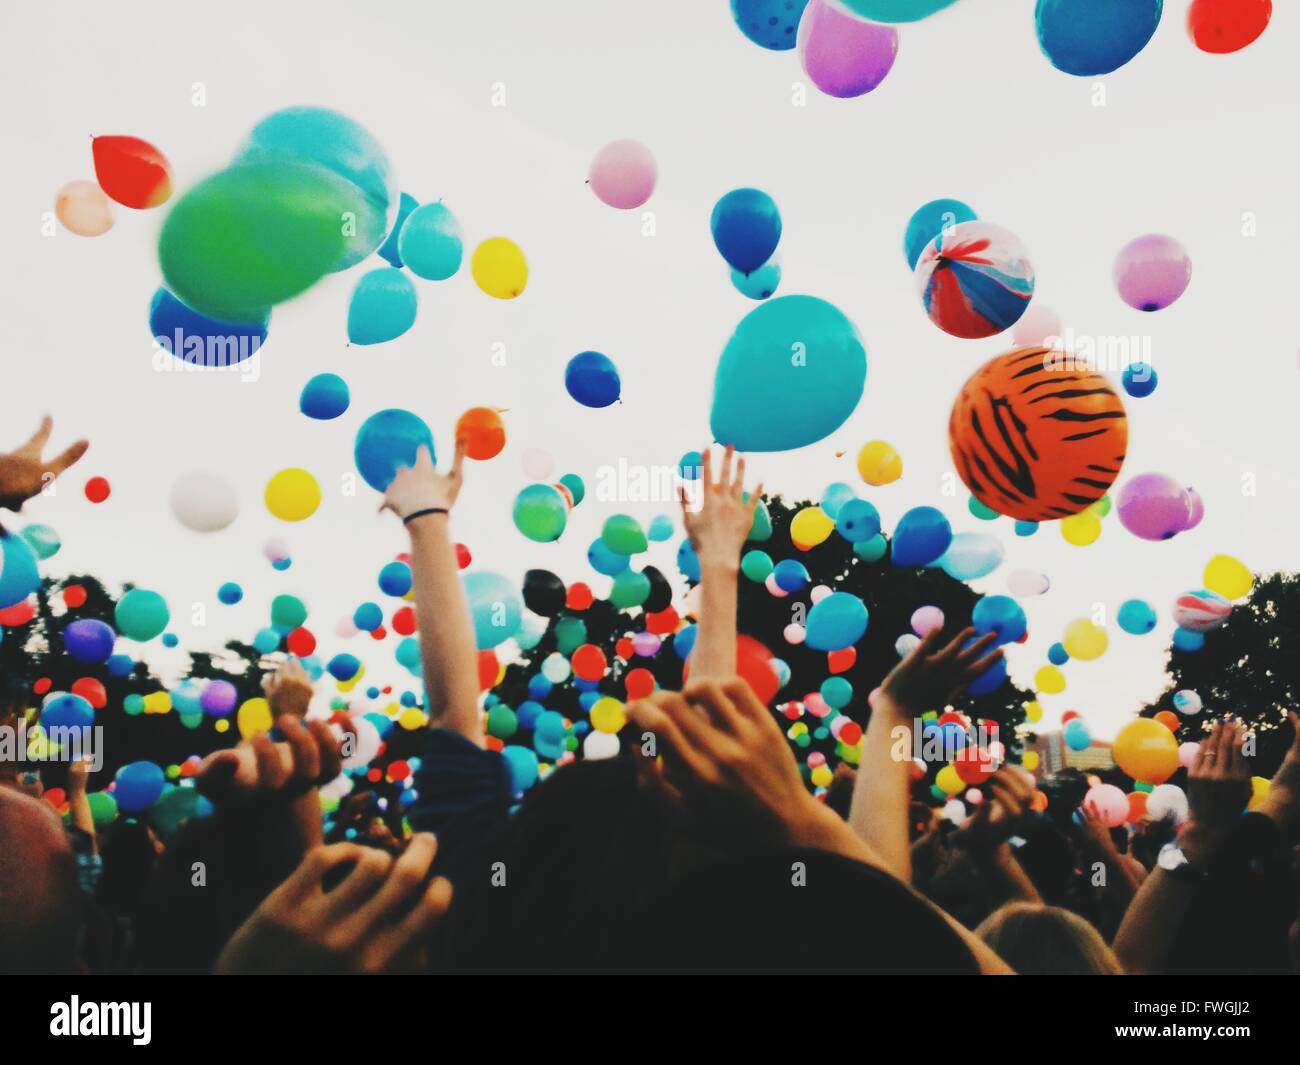 Crowd throwing colorful balloons against sky during festival Stock Photo